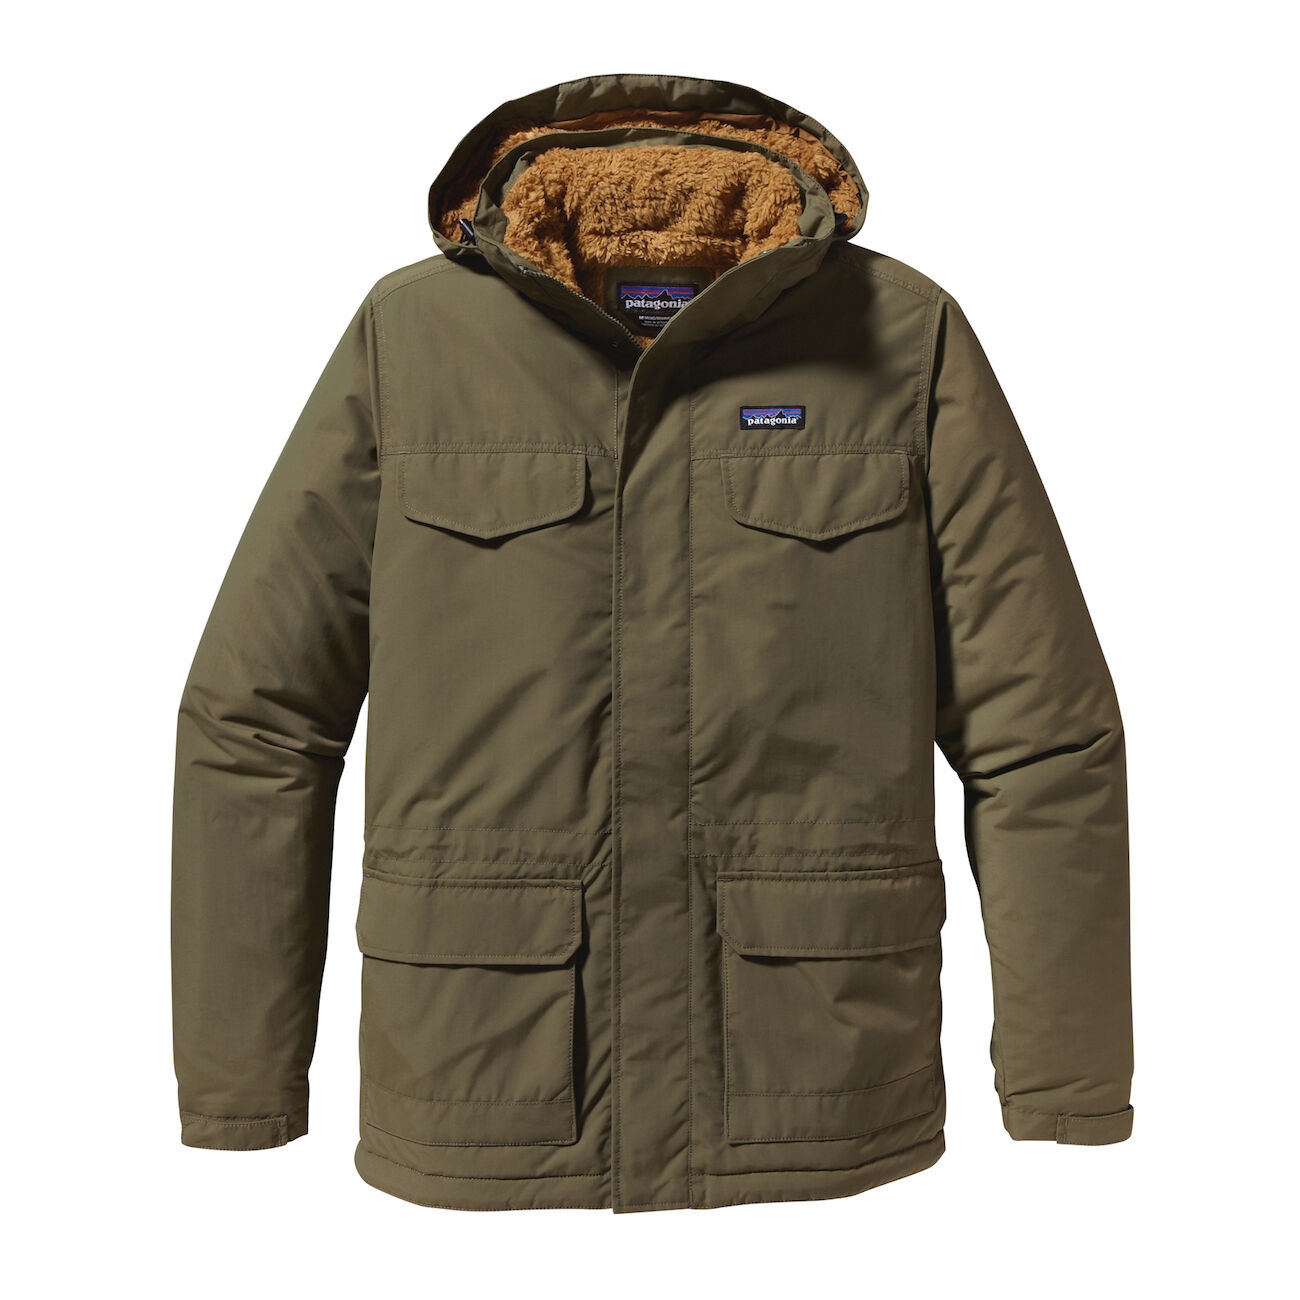 Patagonia - Isthmus - Parka - Hombre